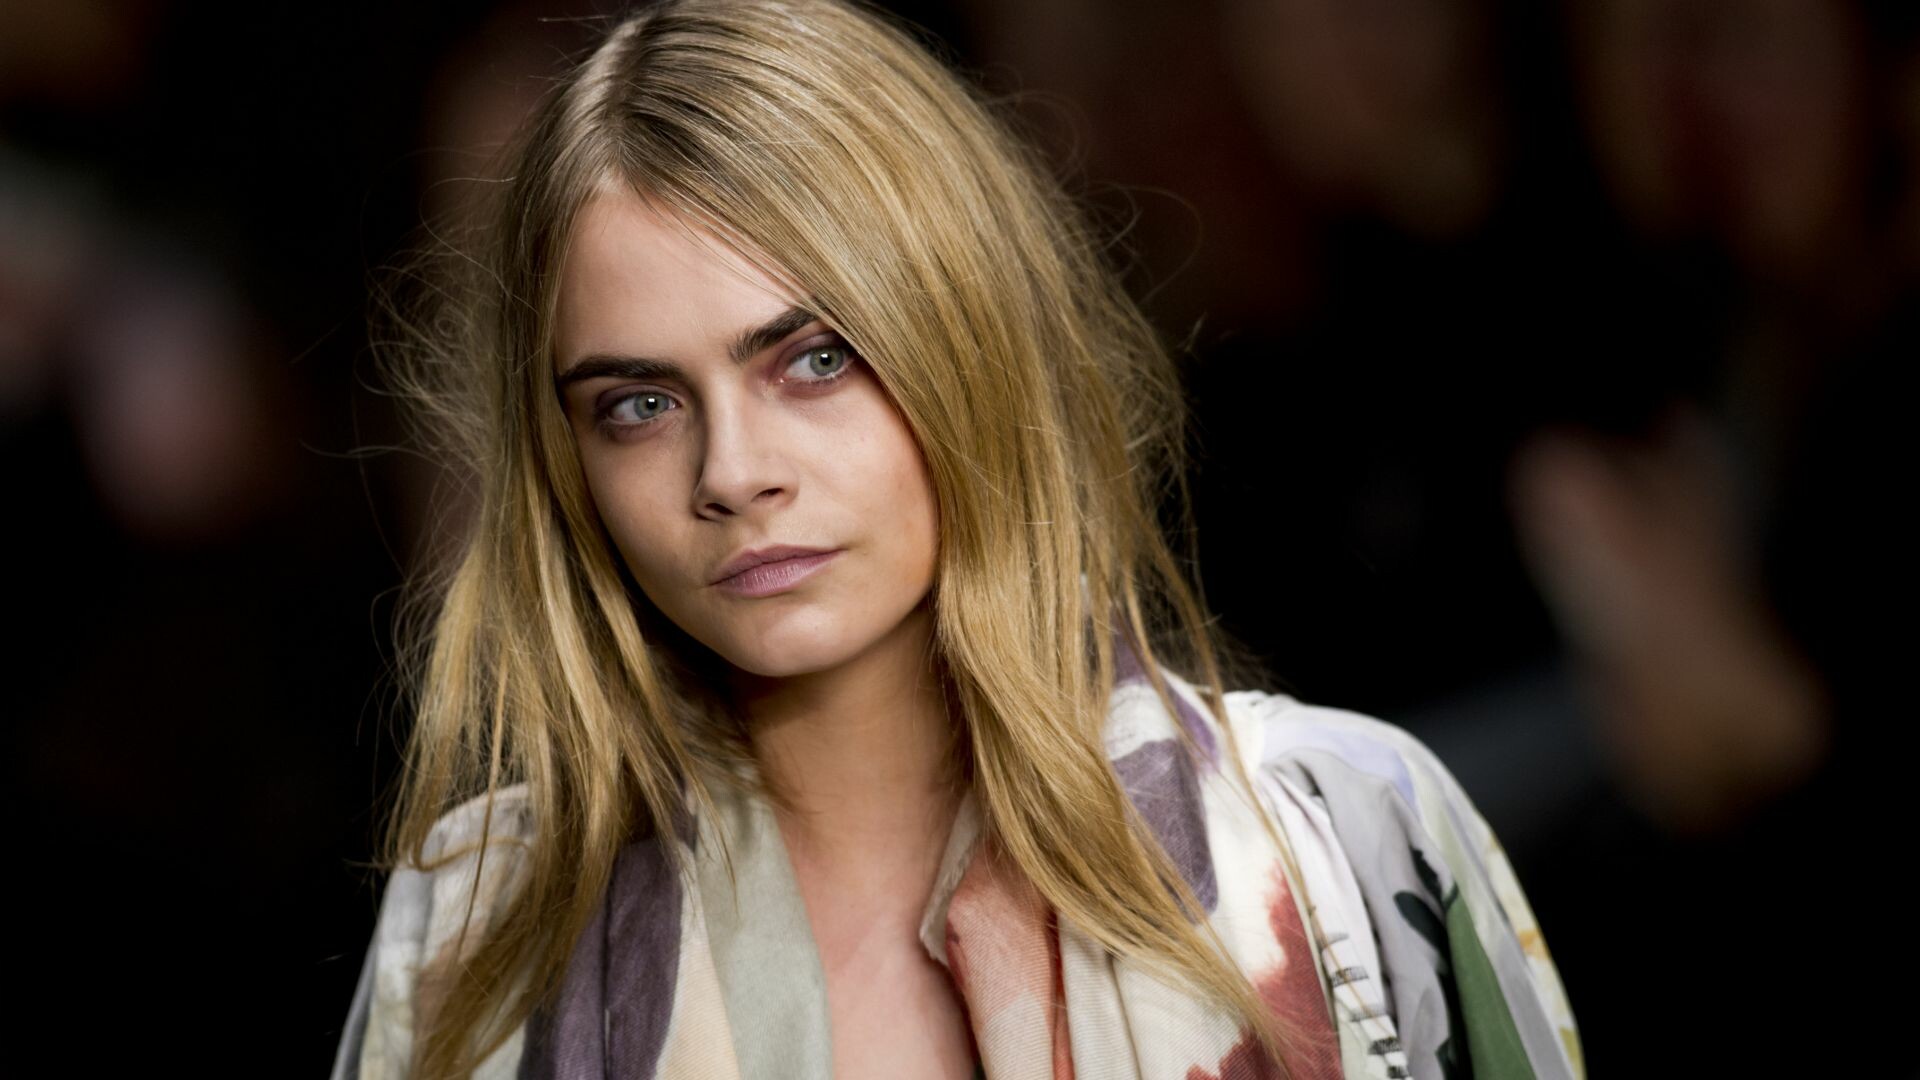 Cara Delevingne: A highly successful British model turned actress. 1920x1080 Full HD Background.